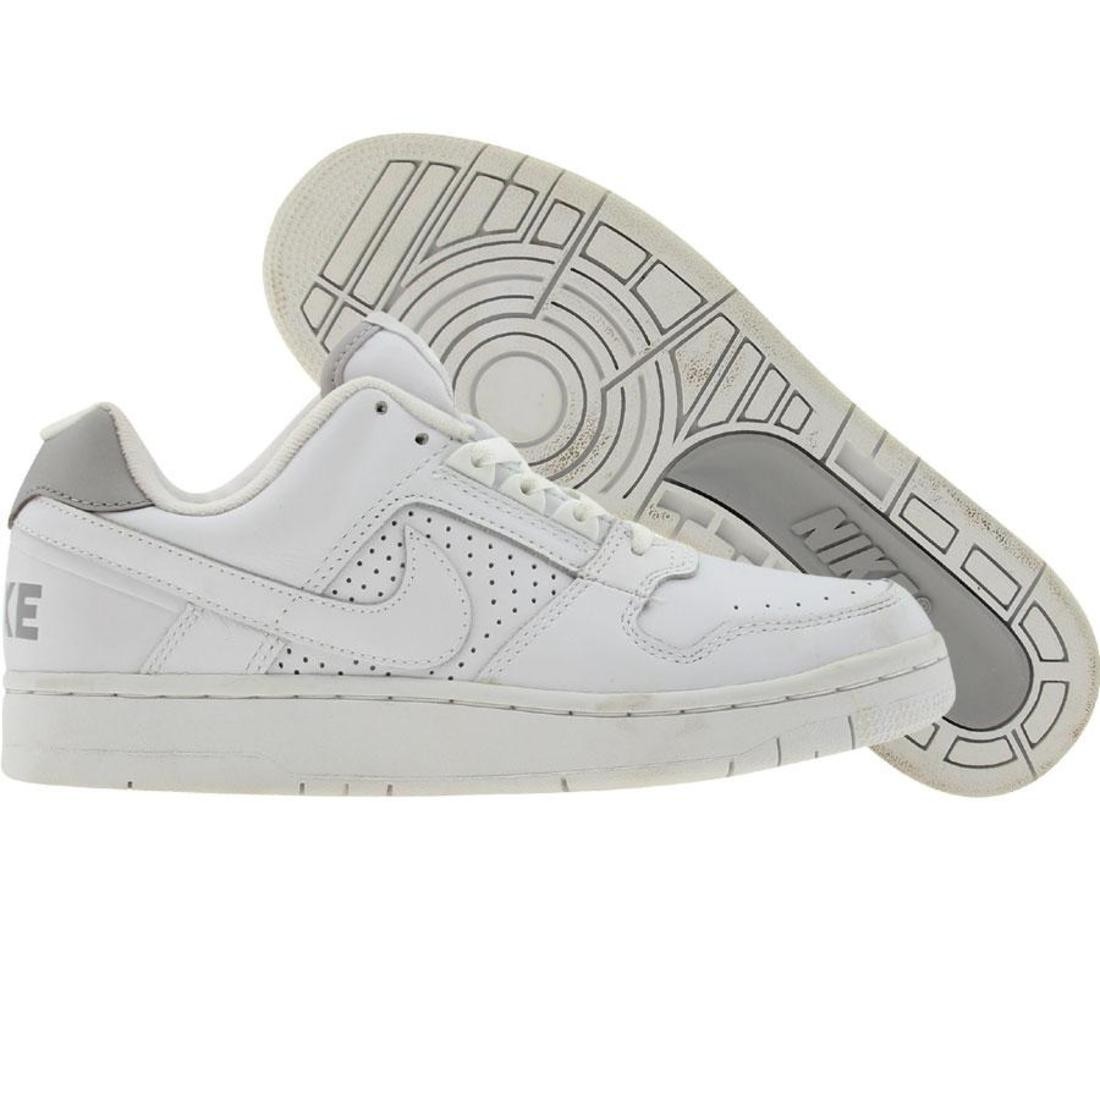 Nike Delta Force Low (white / neutral grey)